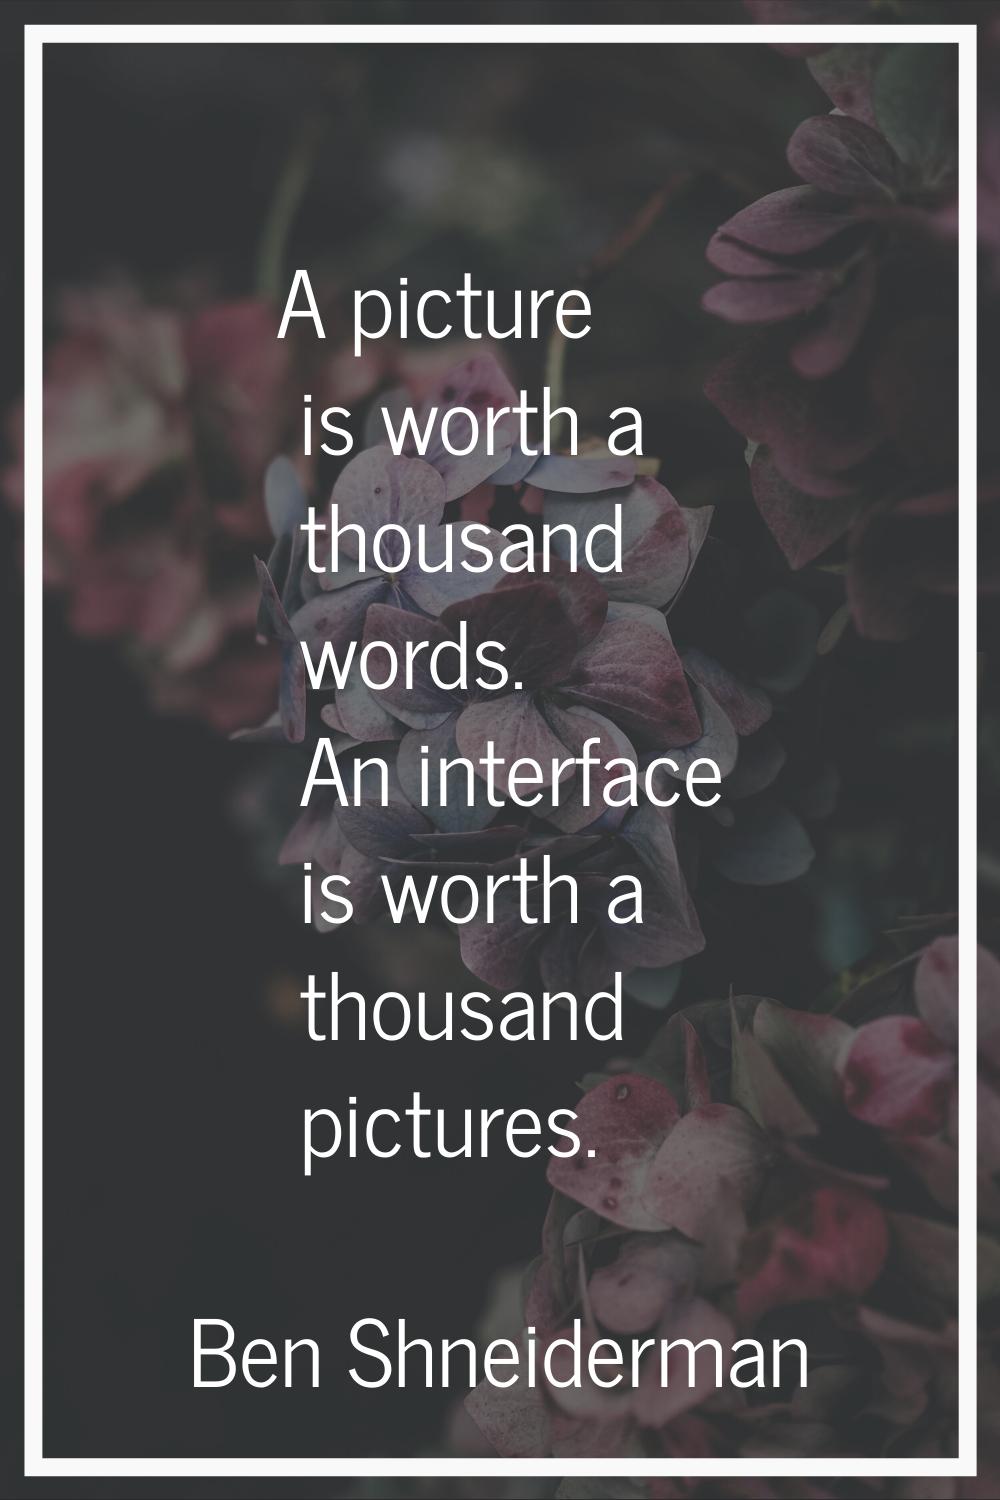 A picture is worth a thousand words. An interface is worth a thousand pictures.